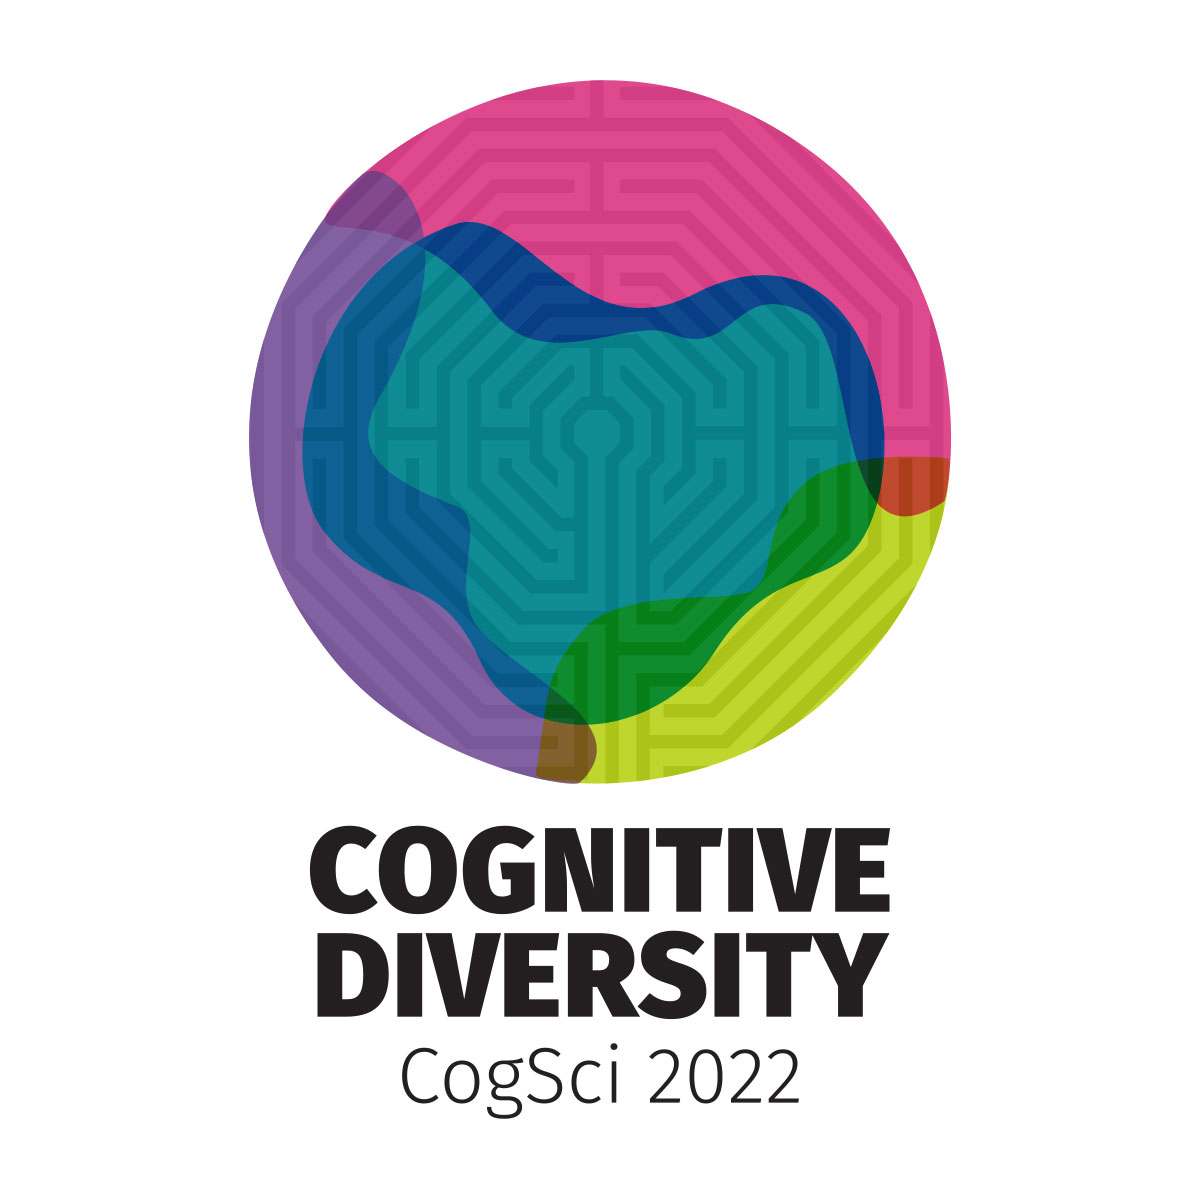 Cognitive Sciences @ IITGN (@cogsiitgn) / X